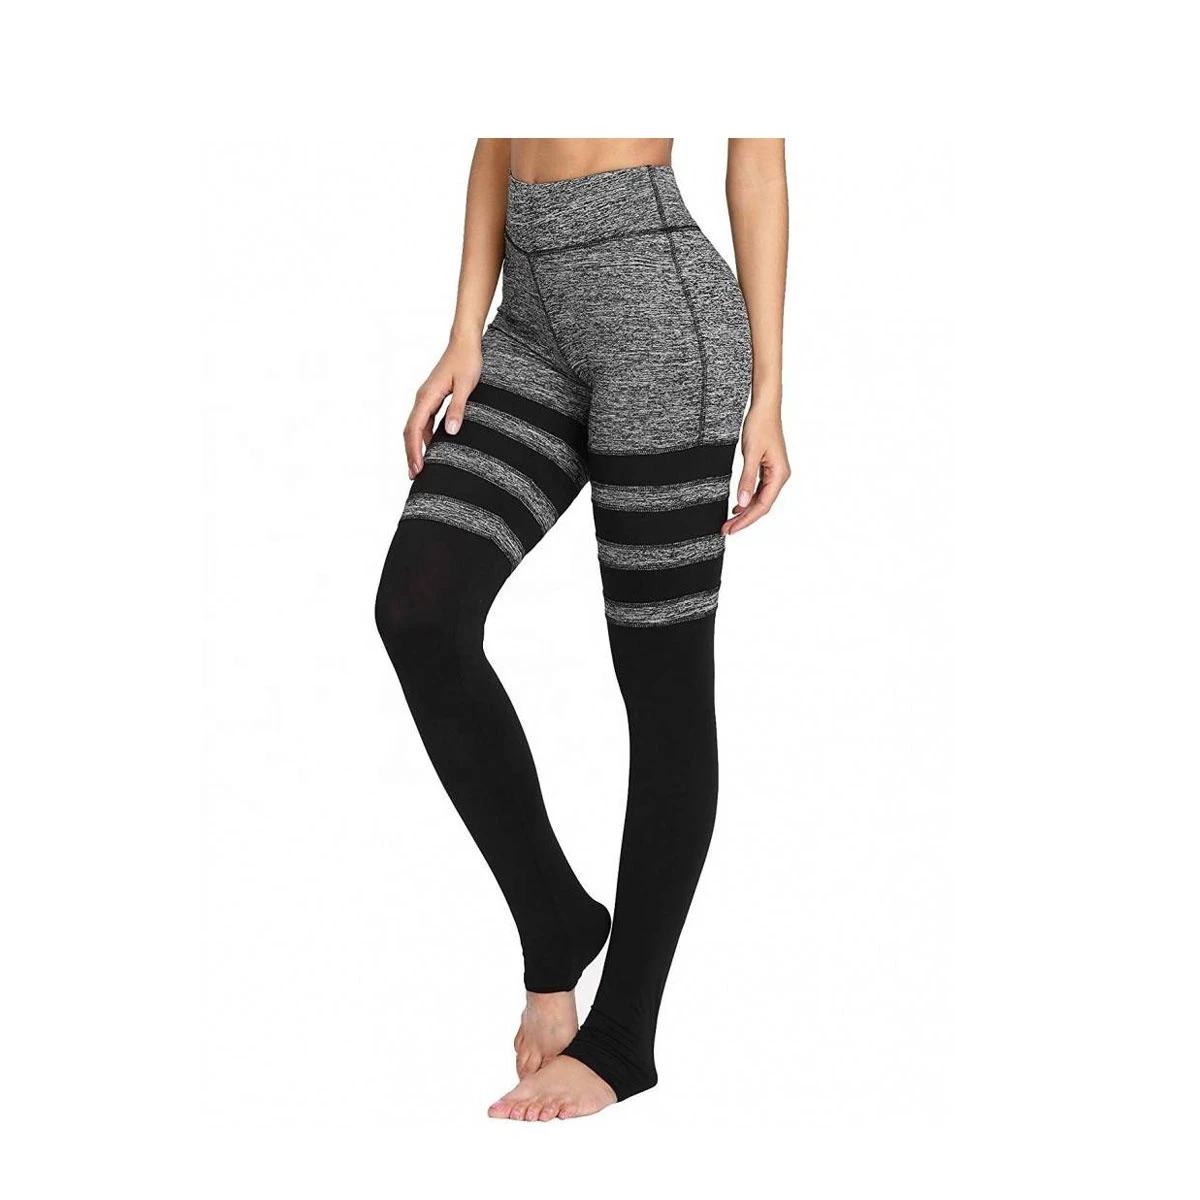 Casual Leggings Fitness leggings New Yoga Suits Women Gym Clothes Fitness Running graphic pants